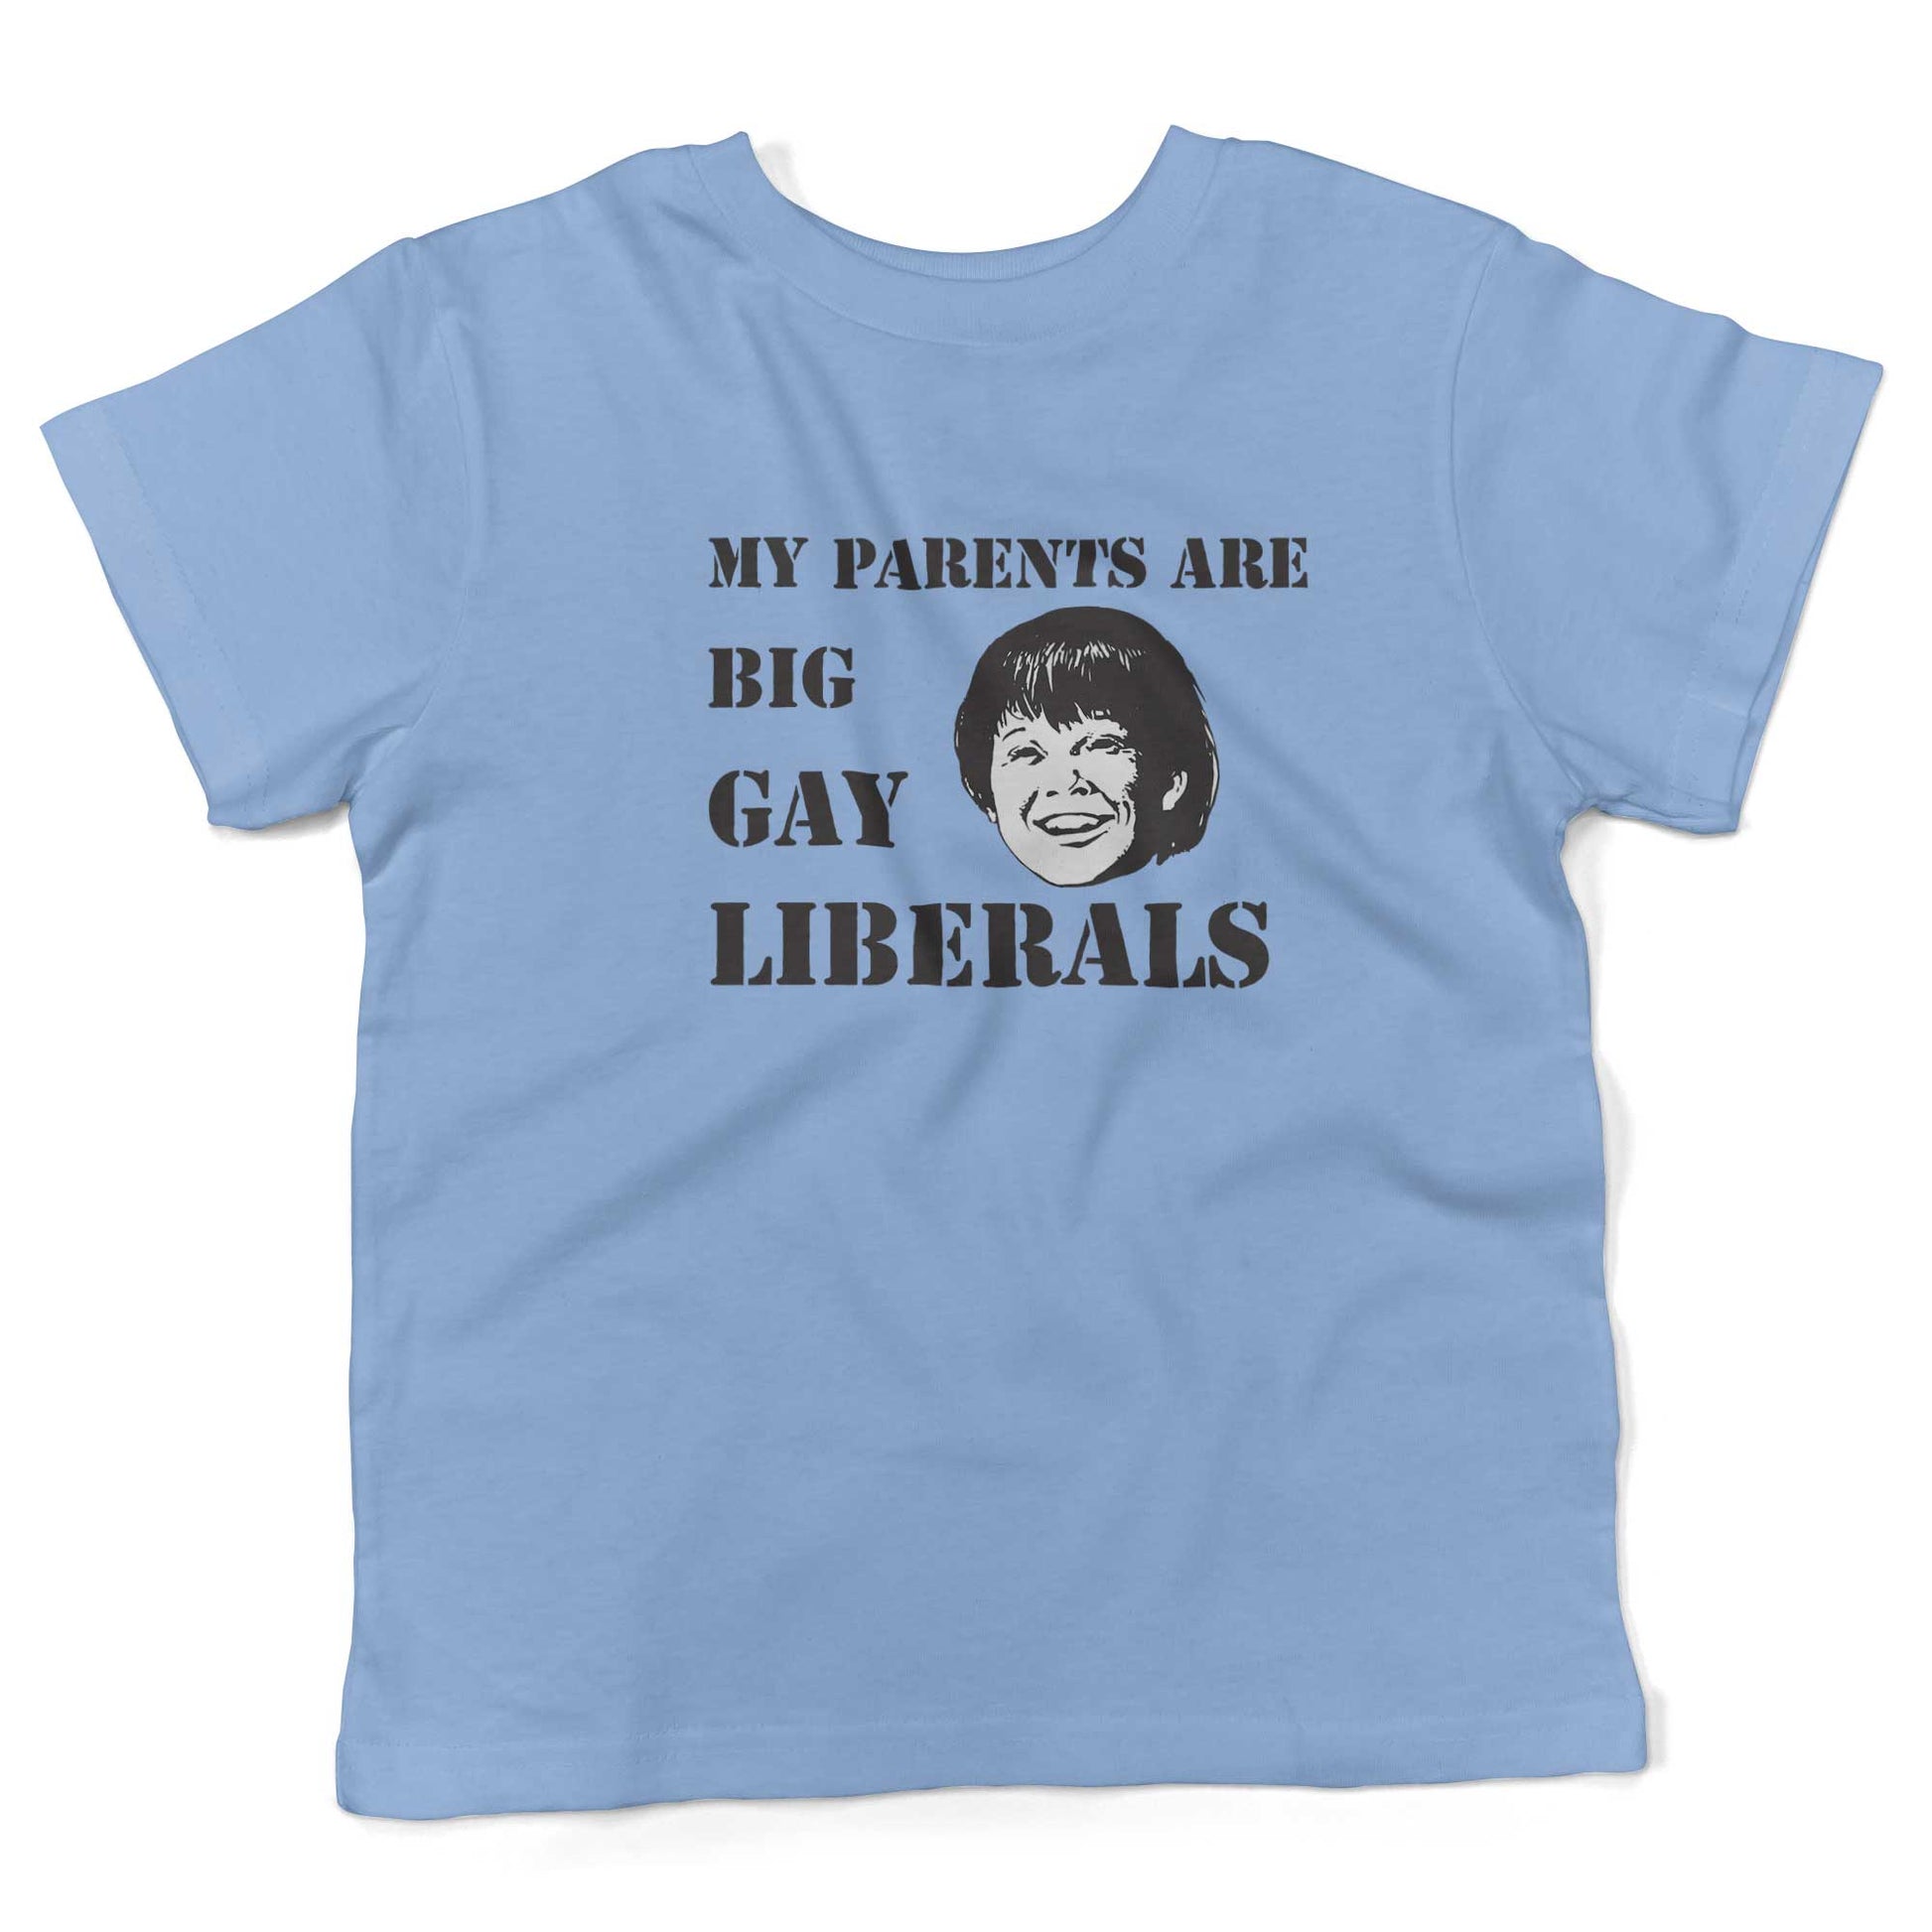 My Parents Are Big, Gay Liberals Toddler Shirt-Organic Baby Blue-2T